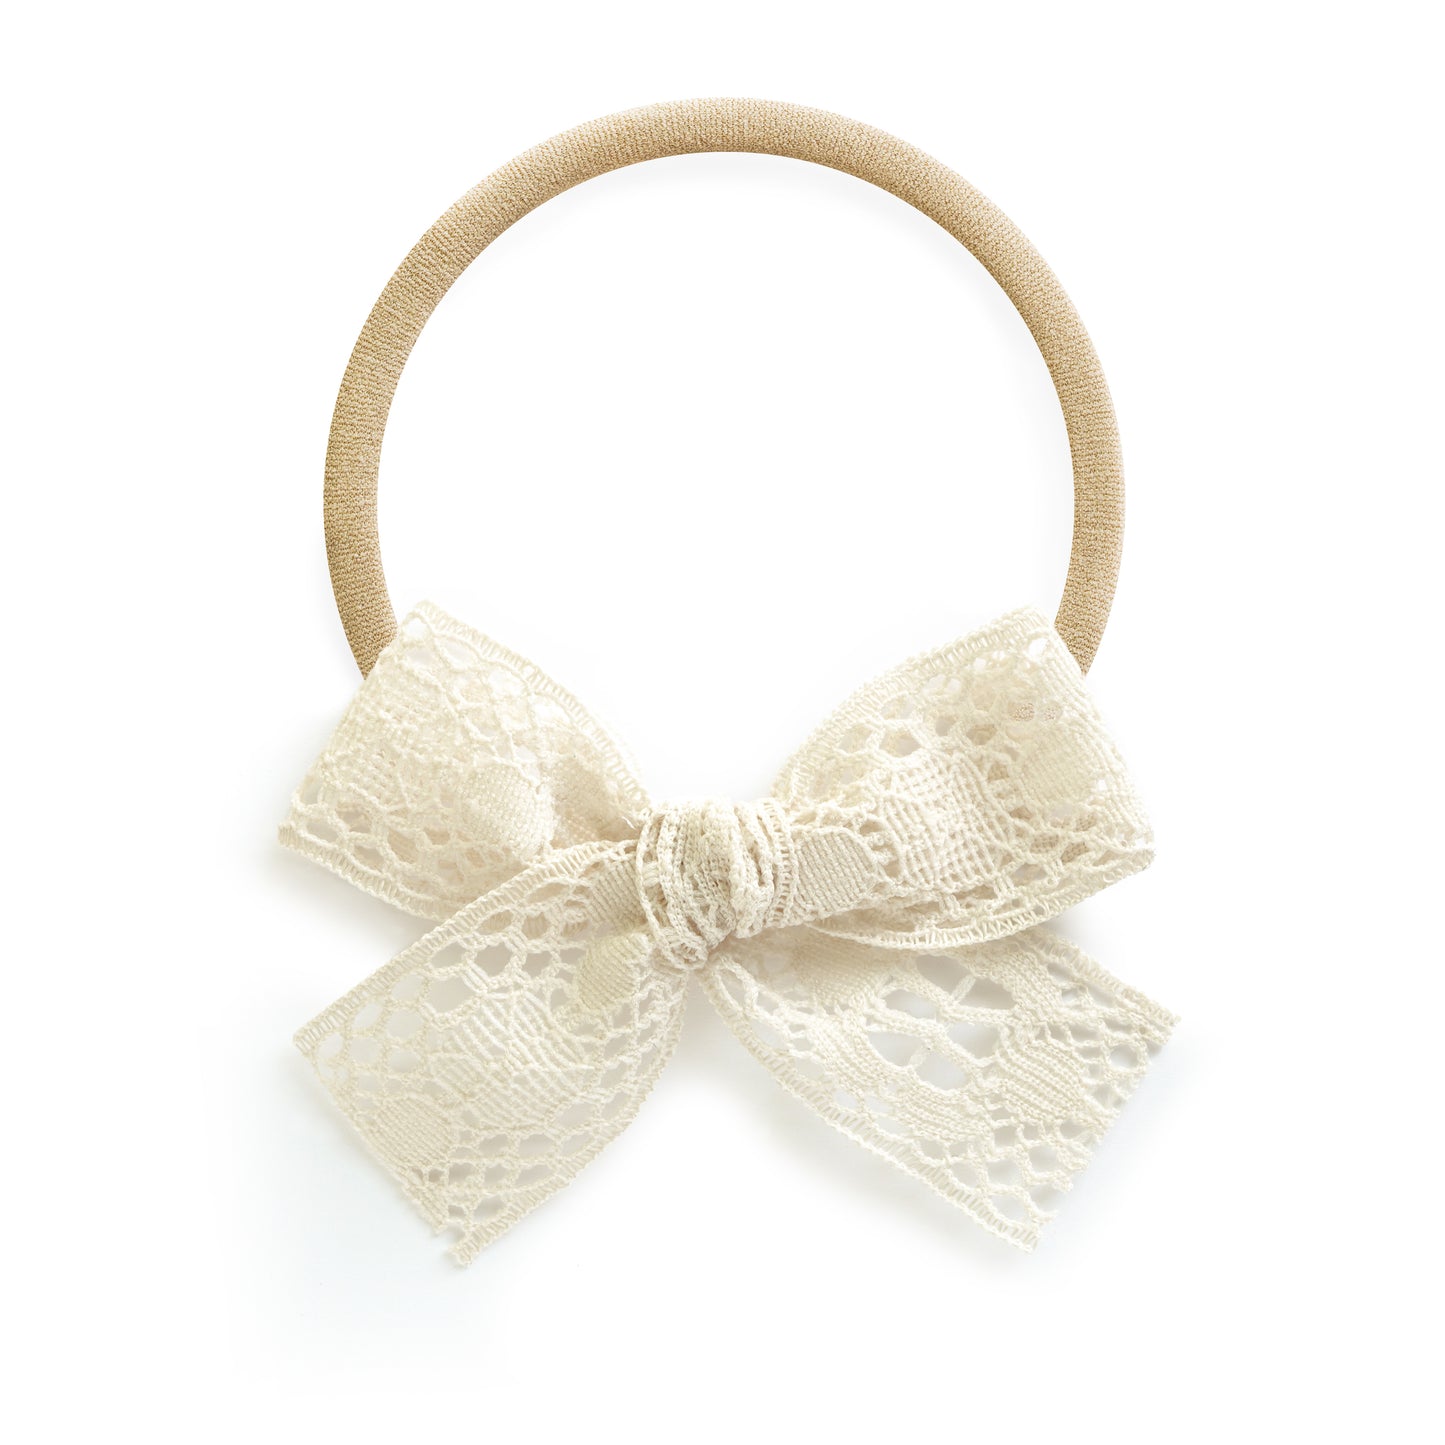 Cream Ivory Lace village baby and little girl bow stretch nylon headband newborn infant toddler